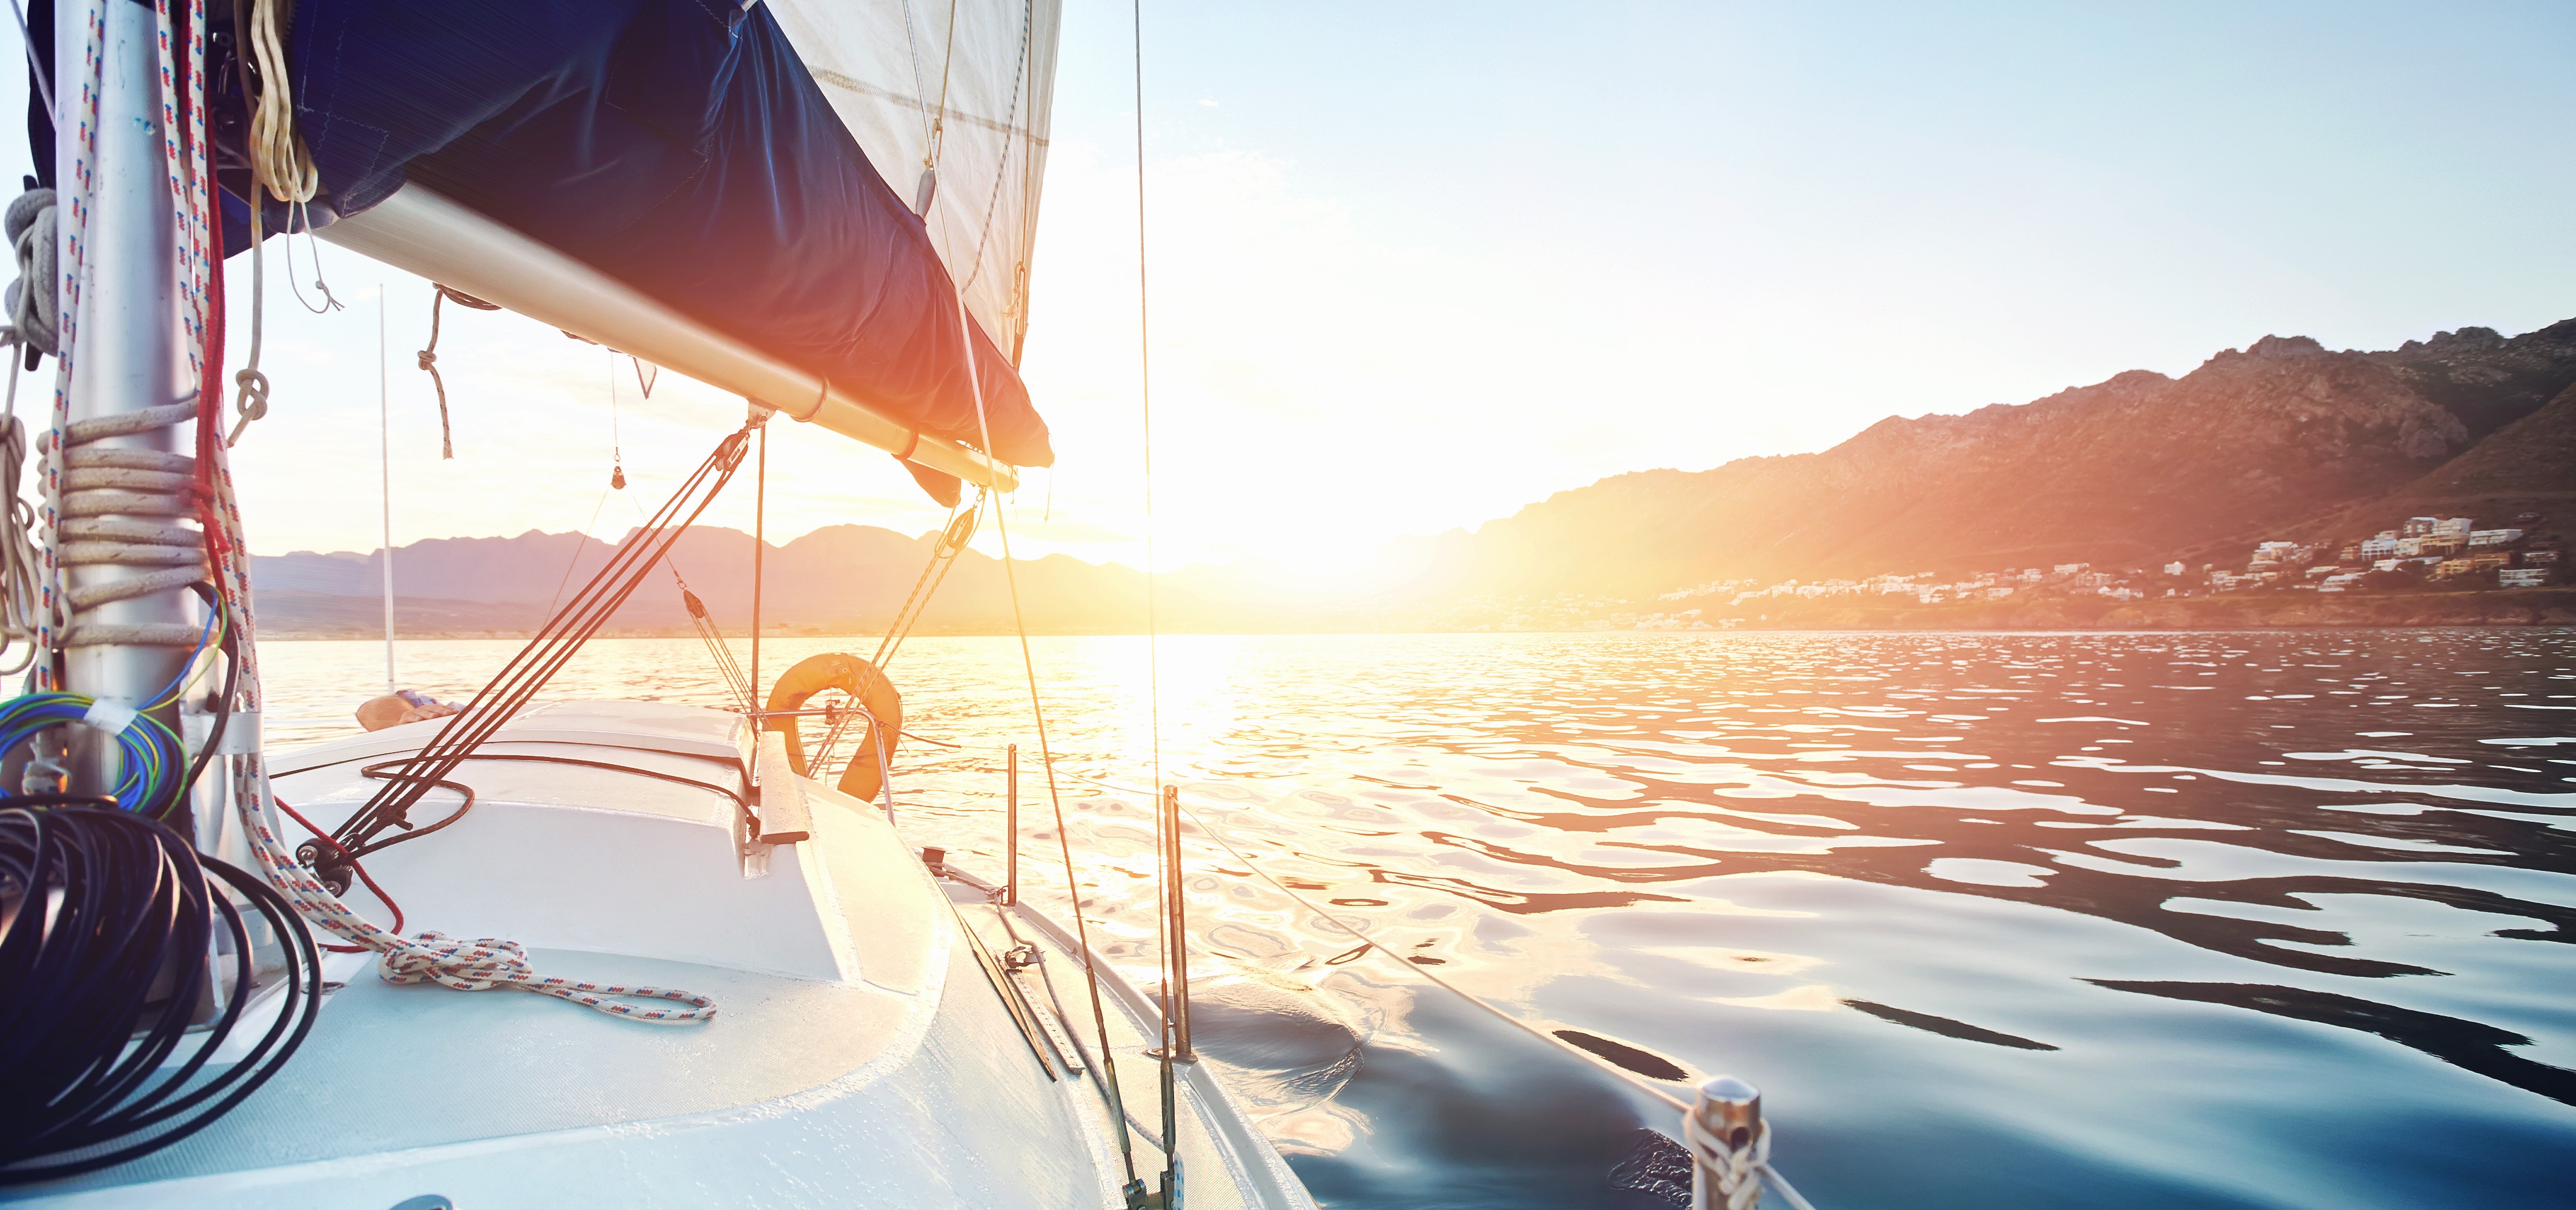 sailing on calm water | compliance management software case study